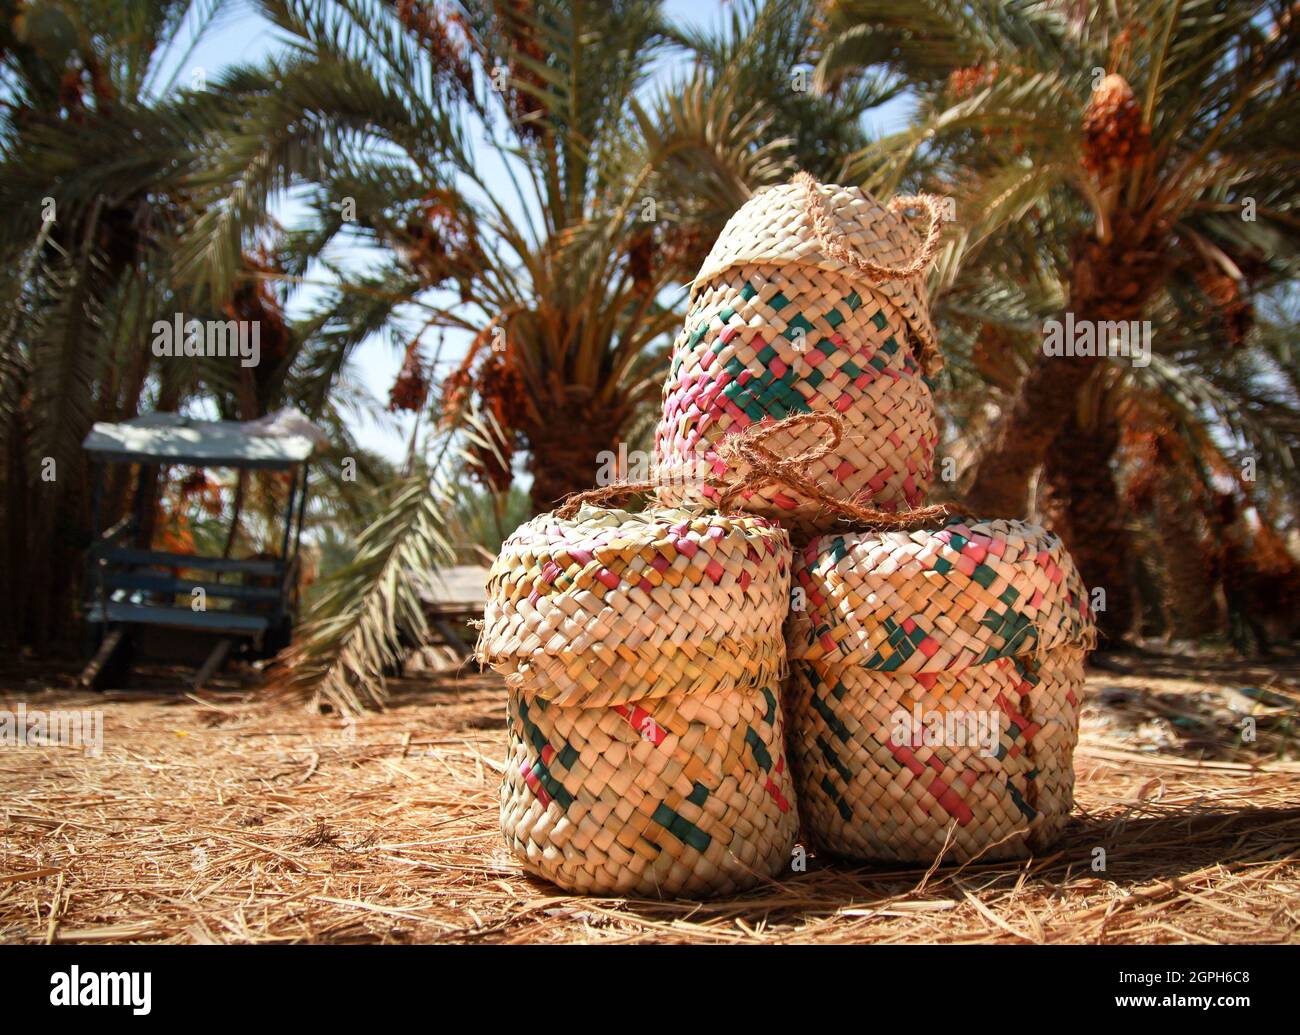 The traditional straw plaited bags of Siwa are still used widely in the Oasis. Stock Photo